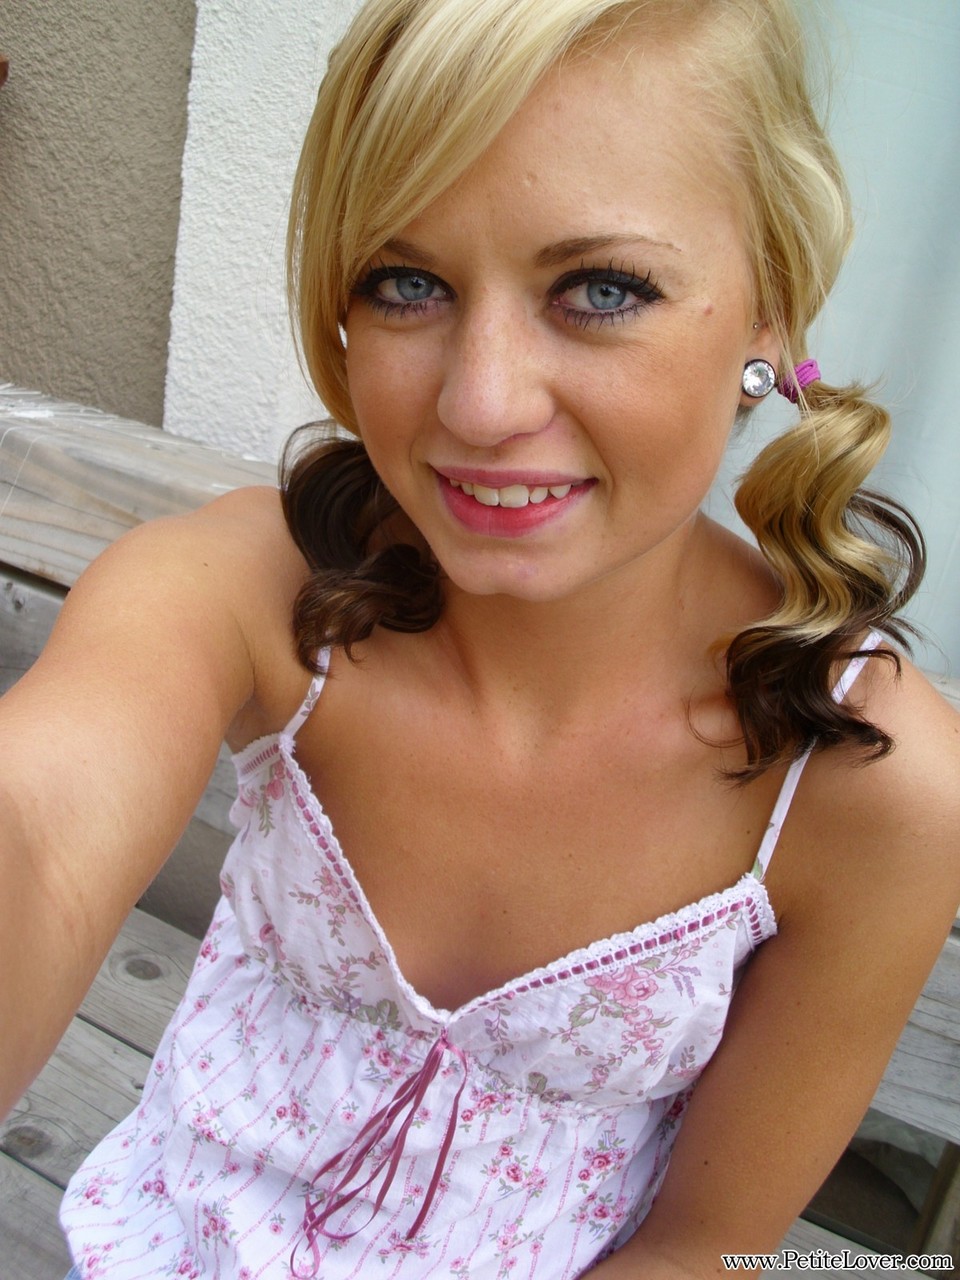 Cute blonde Tiff in pigtails showing off her wee small tits & tiny bald pussy porn photo #428361803 | Petite Lover Pics, Tiff, Amateur, mobile porn